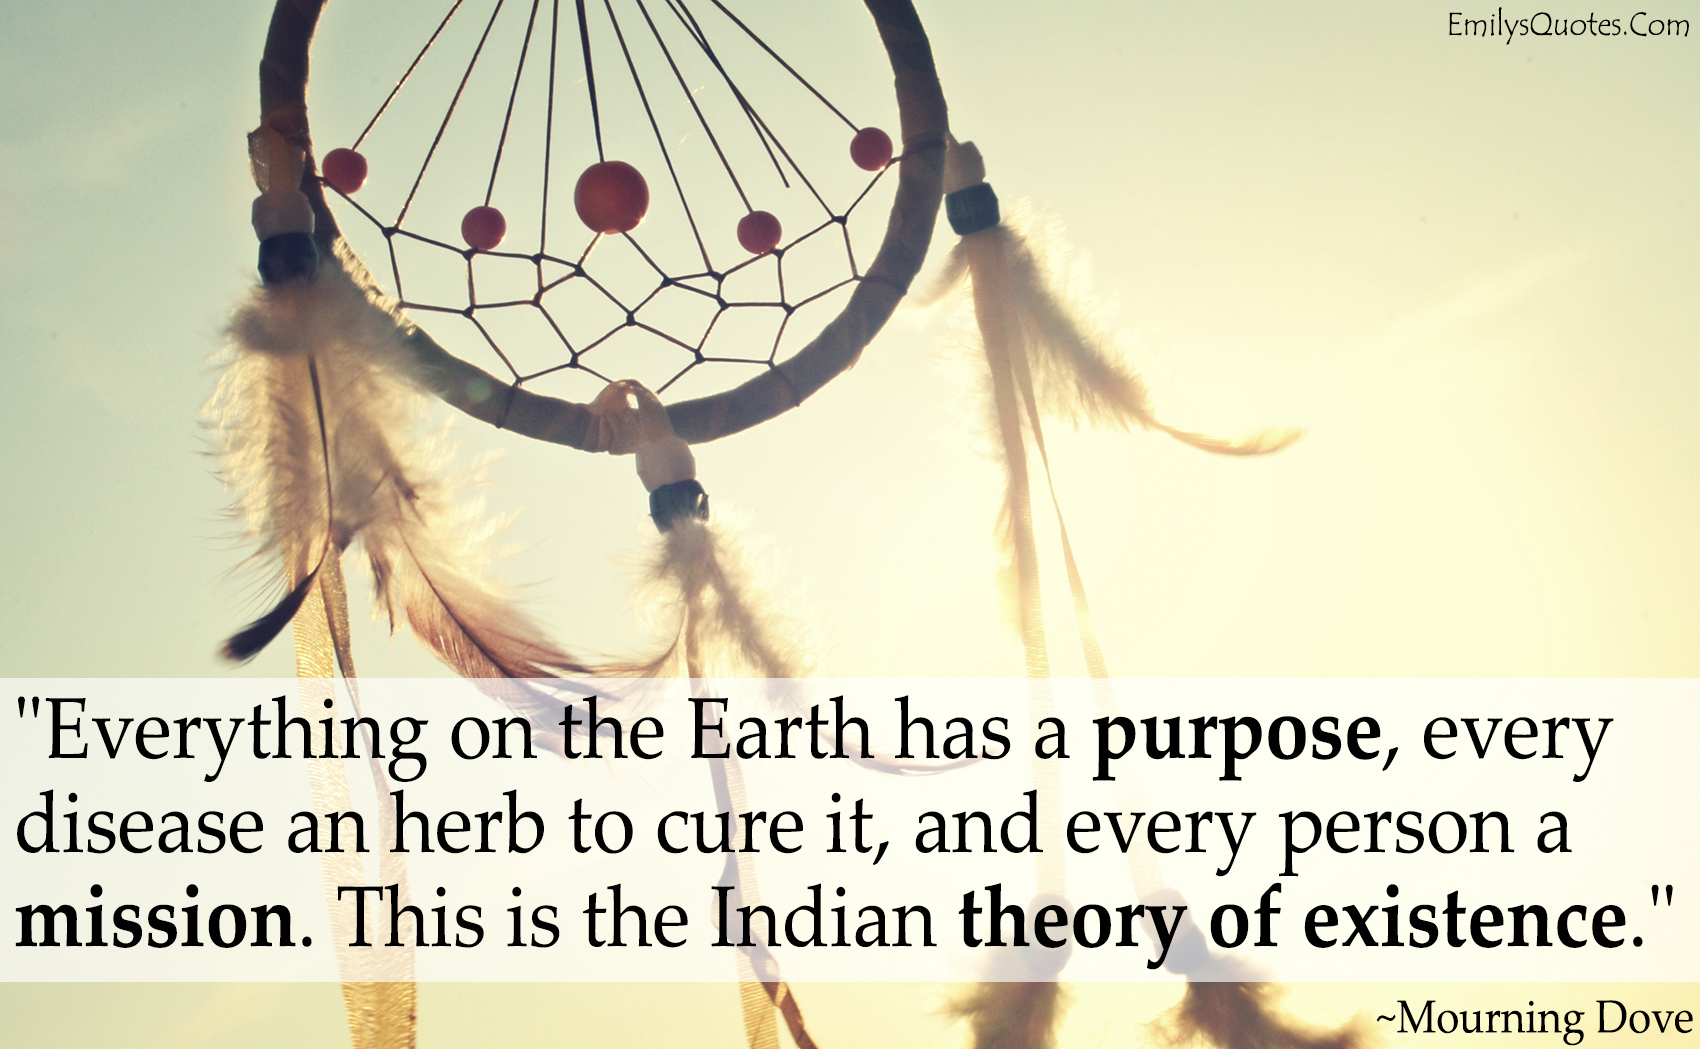 Everything on the earth has a purpose, every disease an herb to cure it, and every person a mission. This is the Indian theory of existence